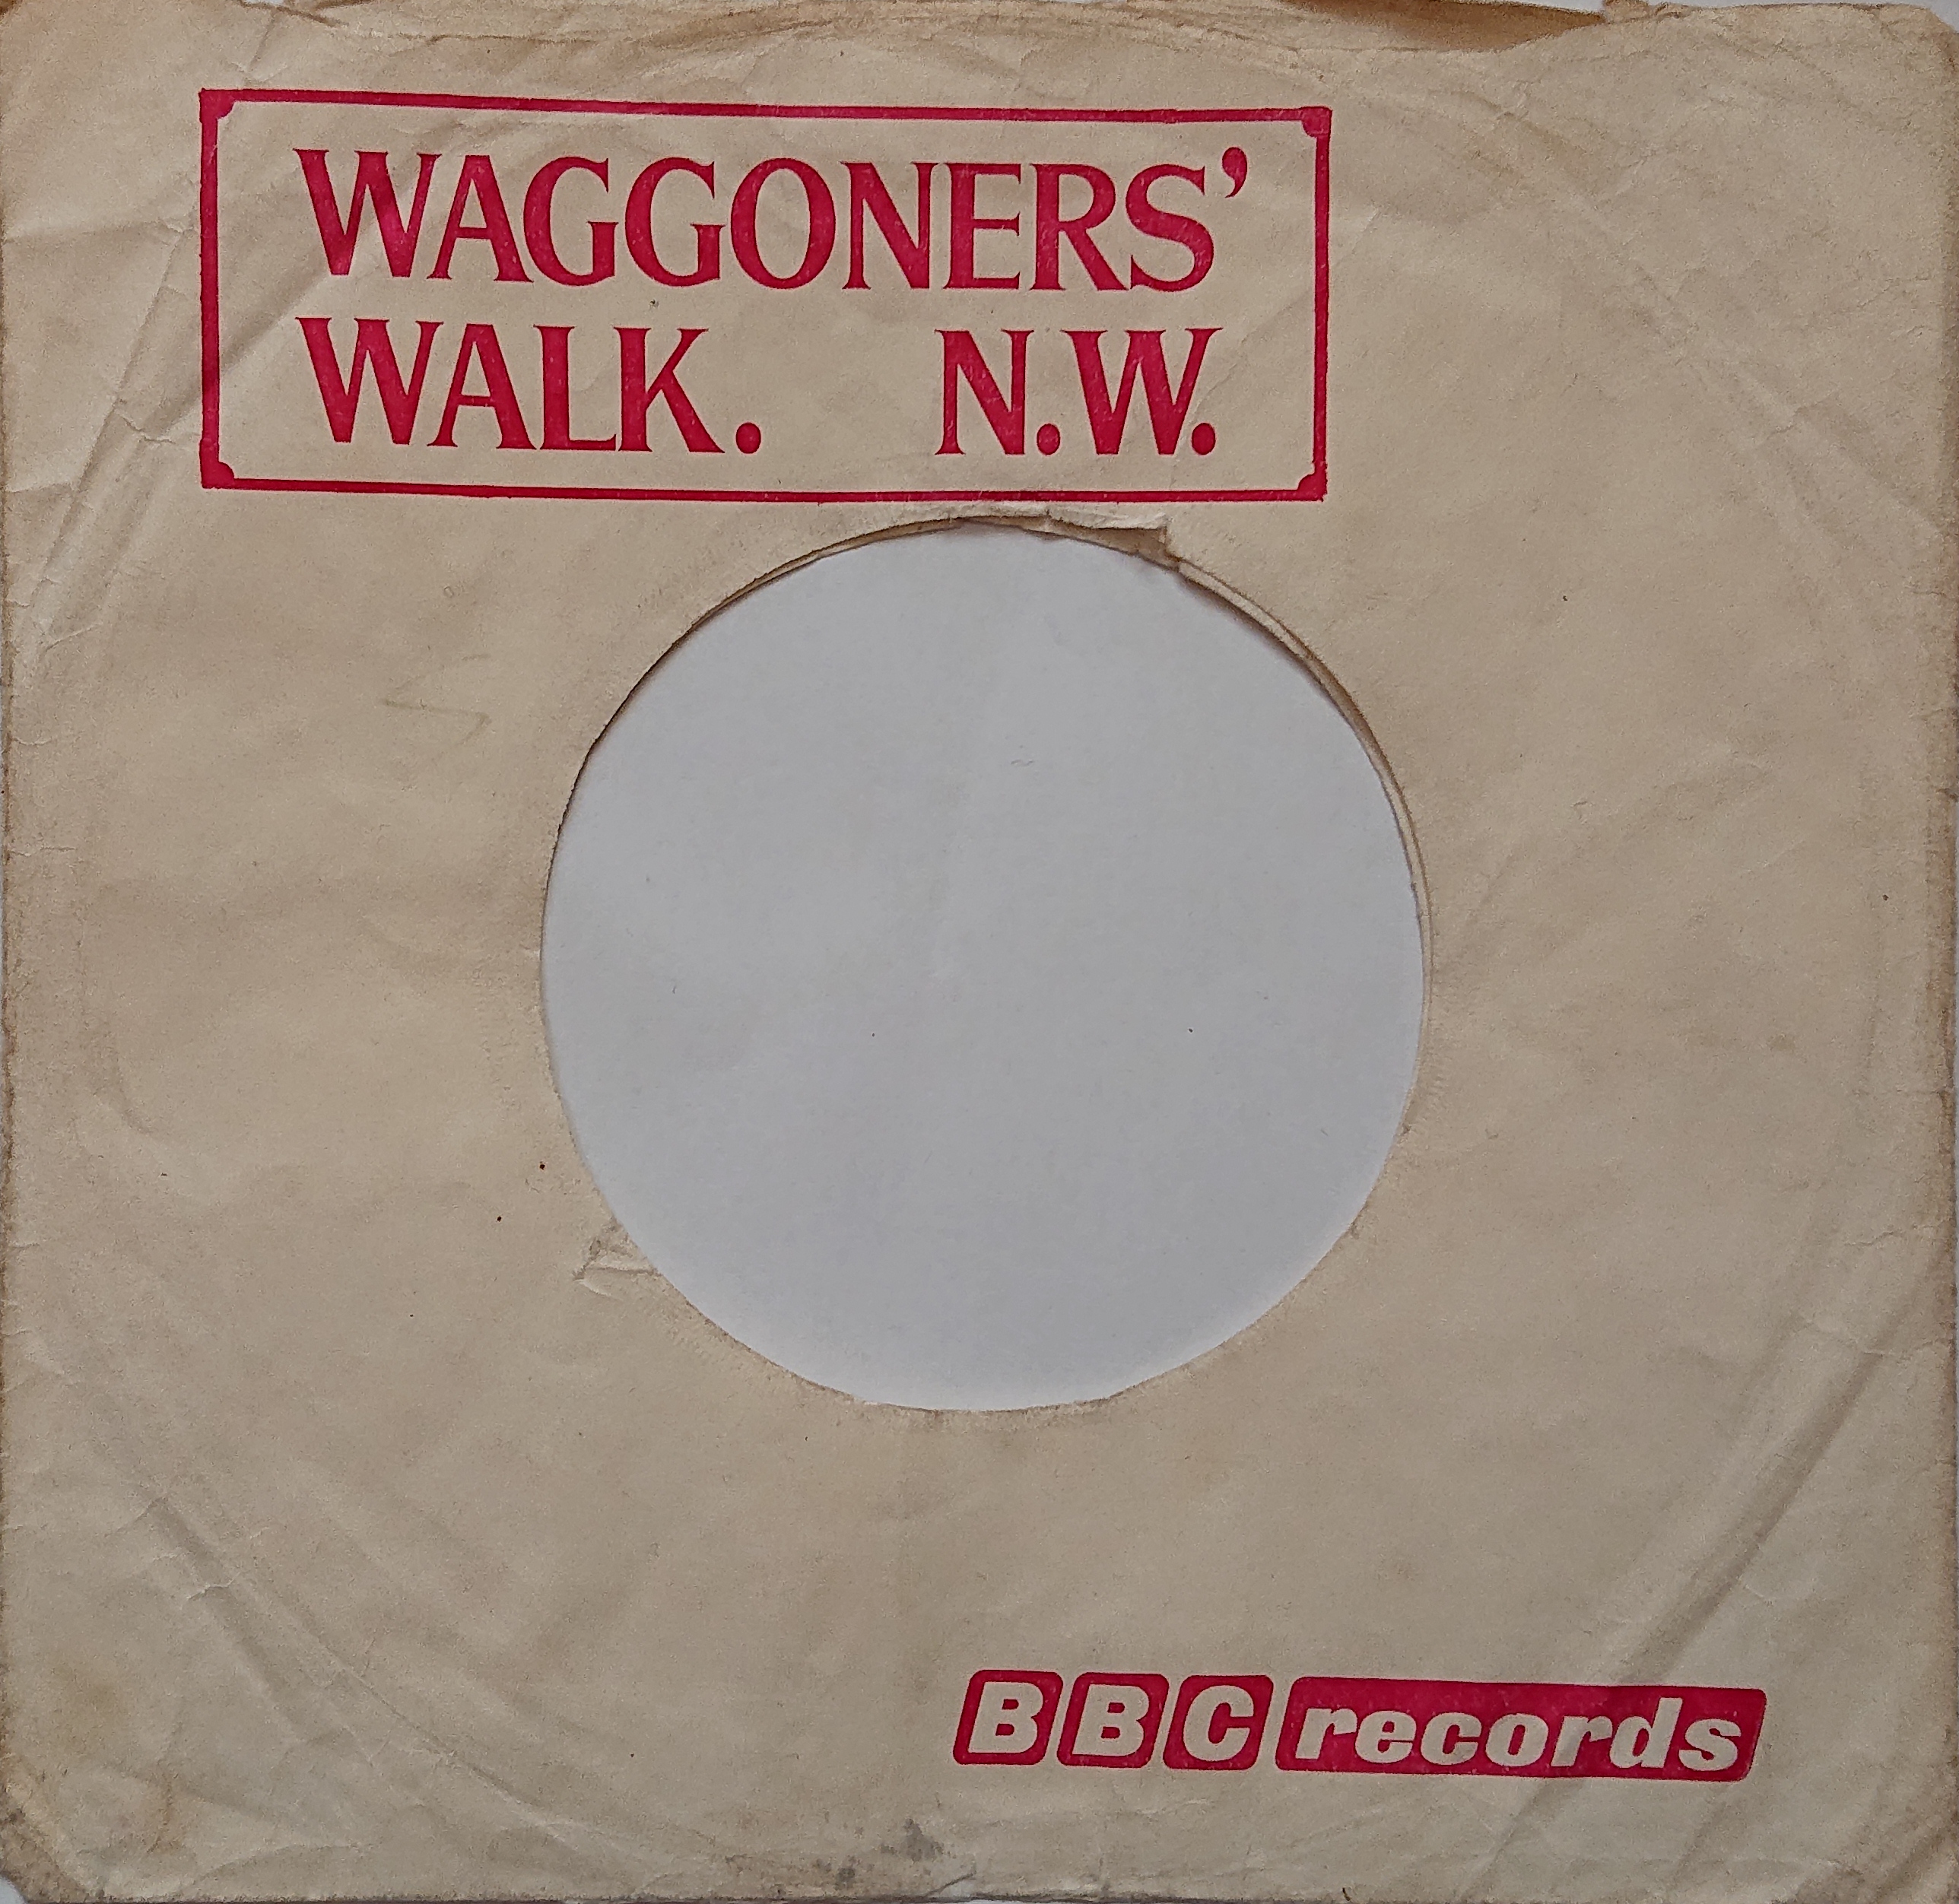 Picture of RESL 5 Waggoners' walk by artist Wade / Cliff / Trane from the BBC singles - Records and Tapes library